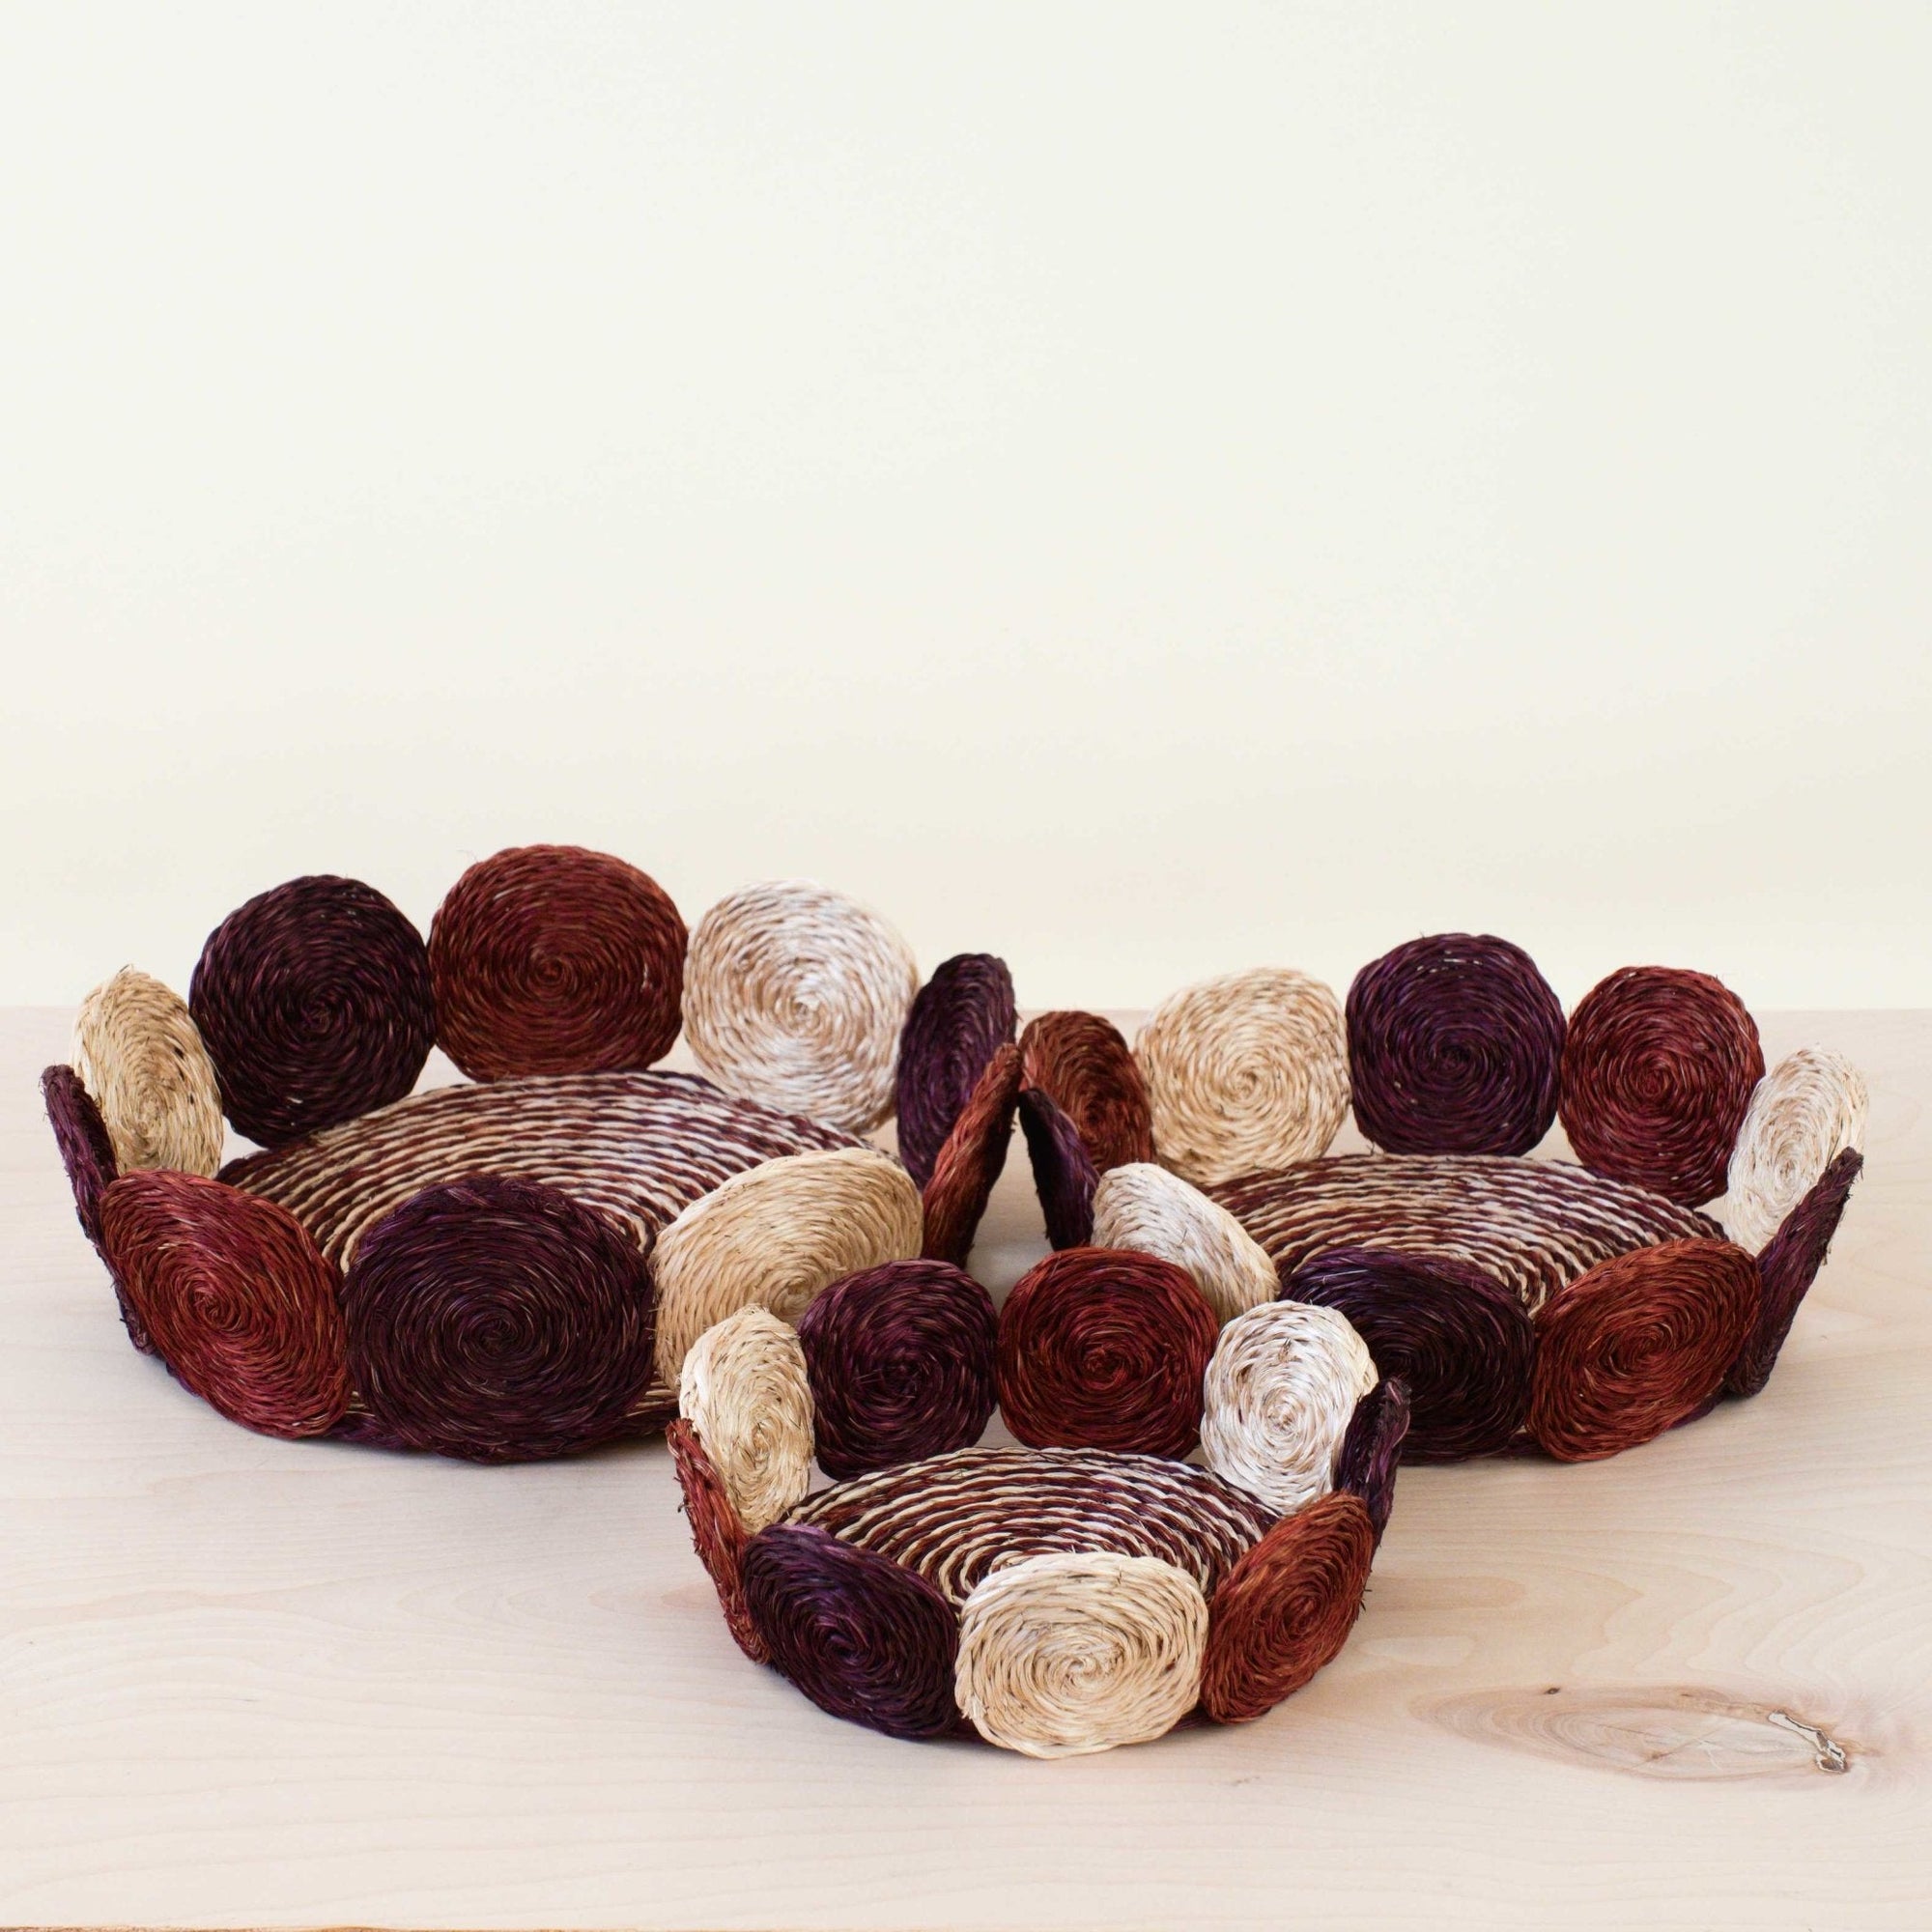 Rust and Mauve Handwoven Fruit Baskets - Set of 3